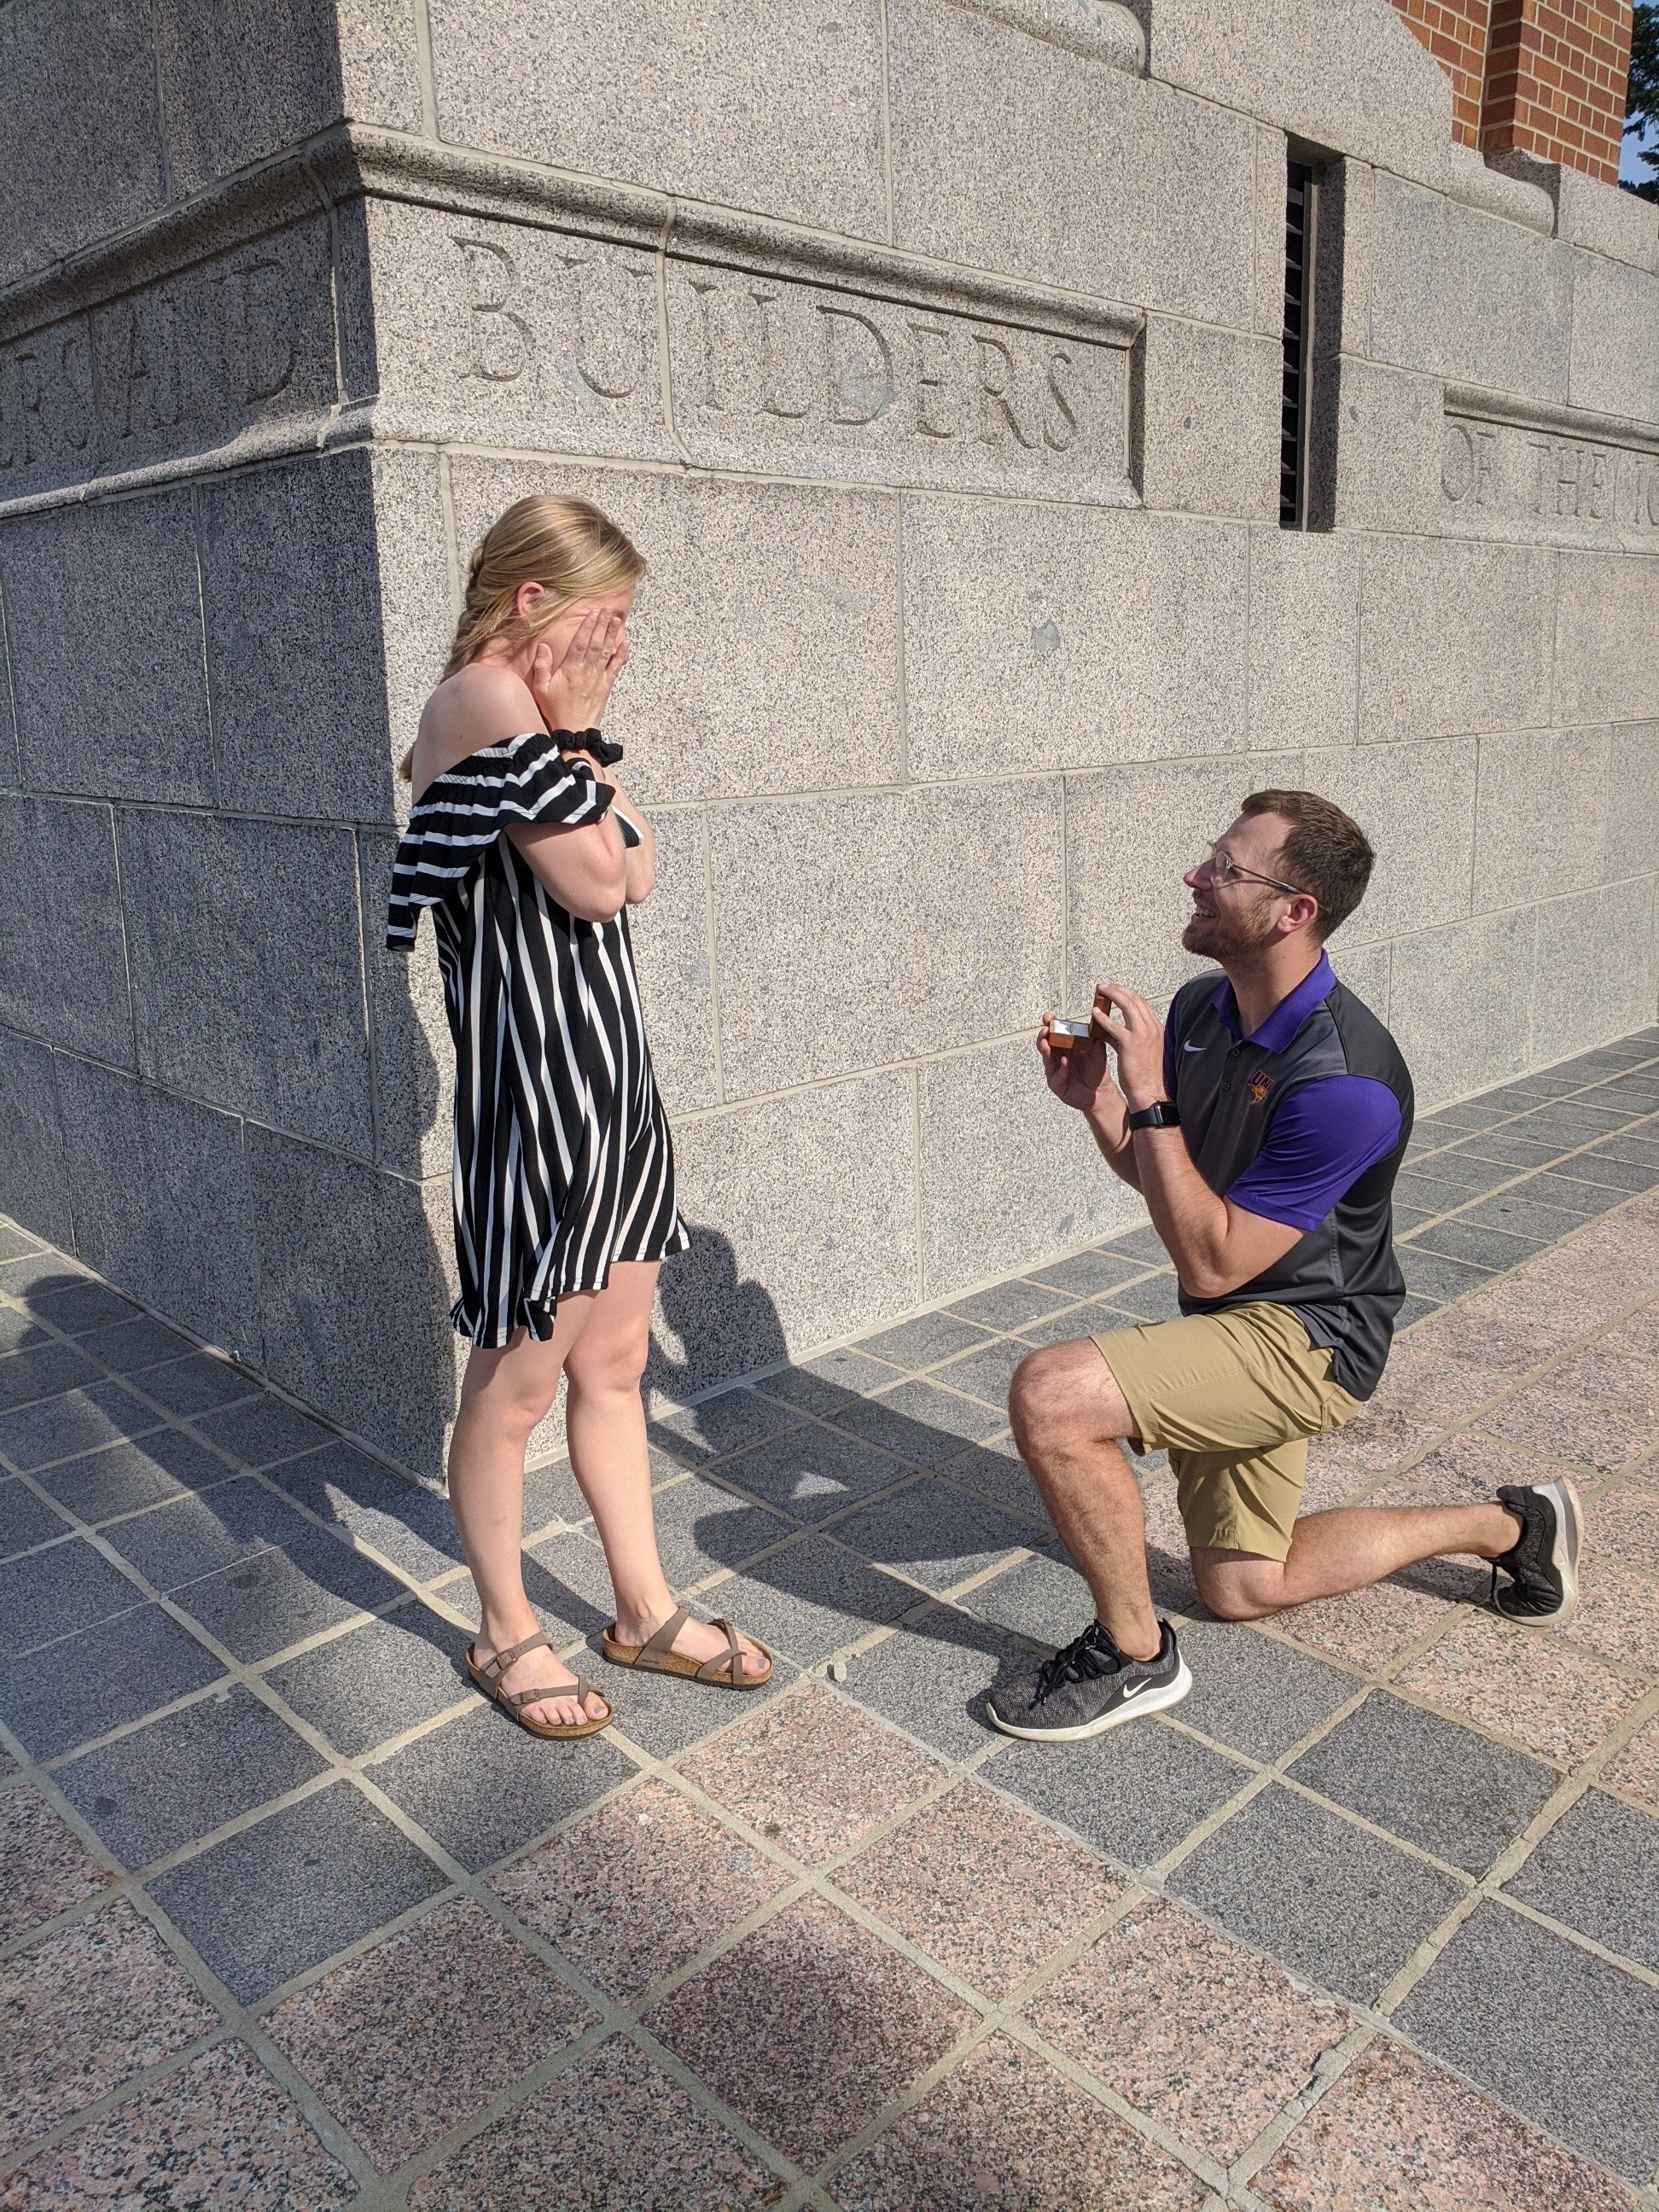 UNI student proposing to his wife in front of the Campanile